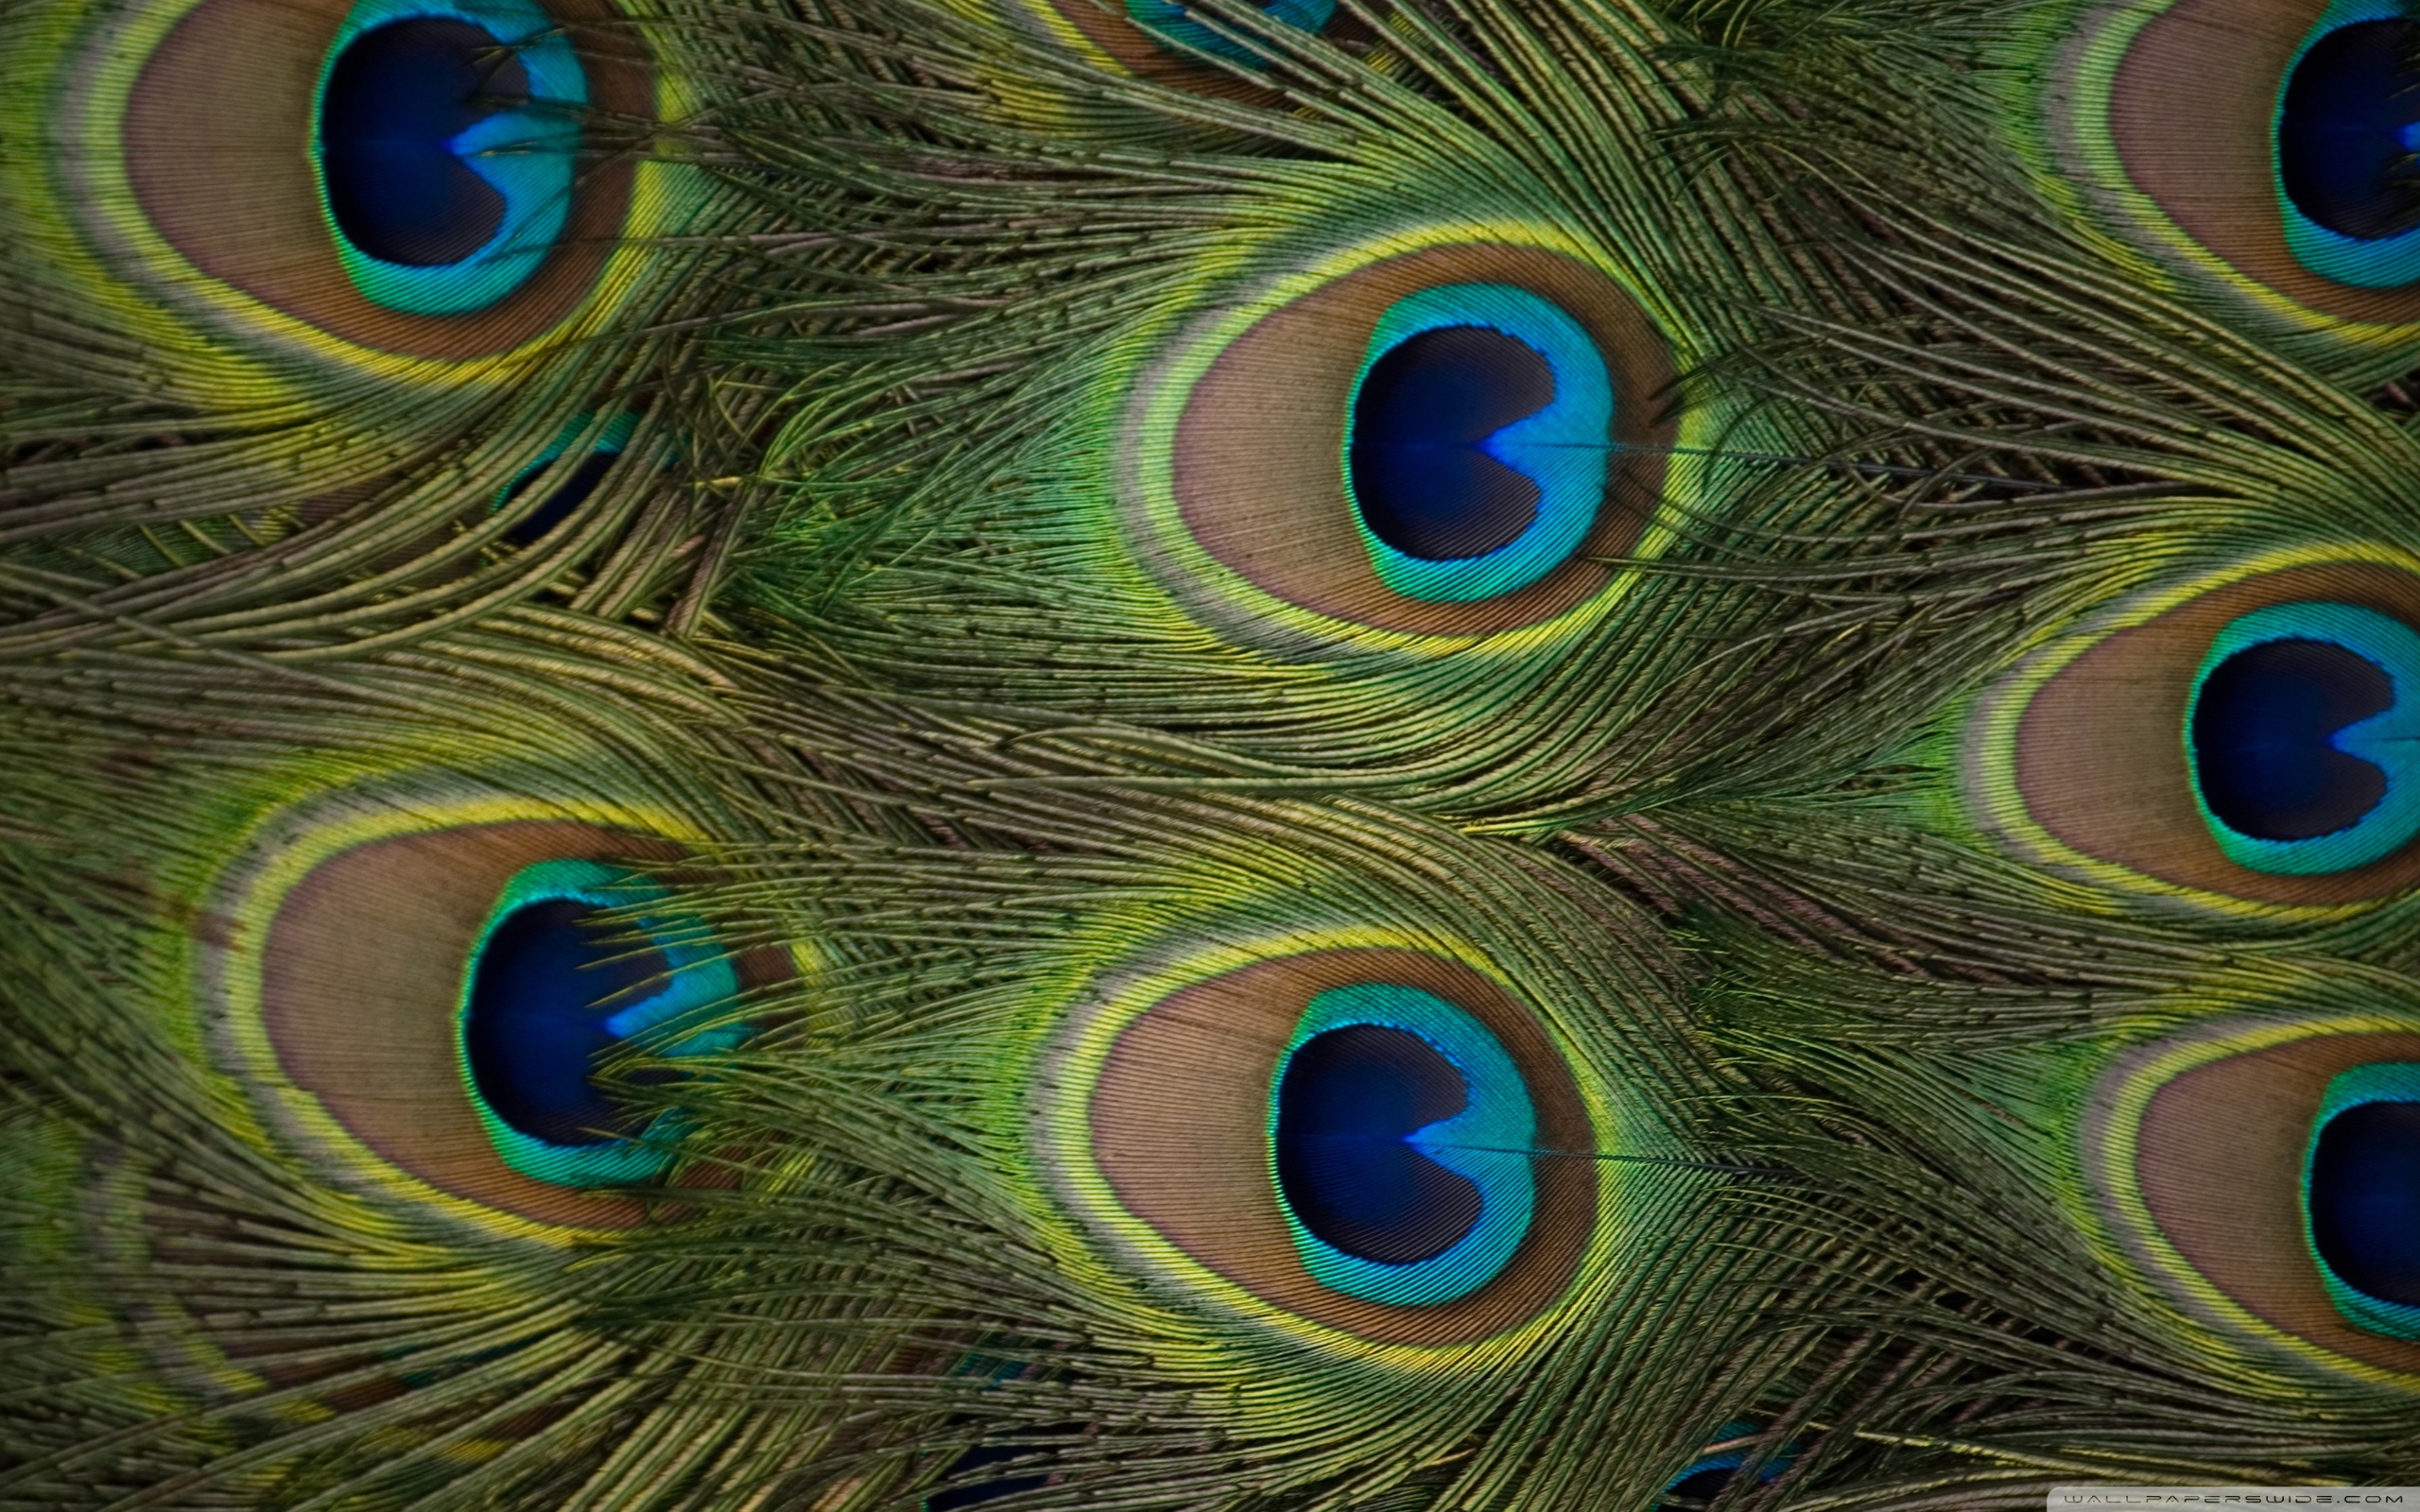 High Definition Peacock Feather - HD Wallpaper 